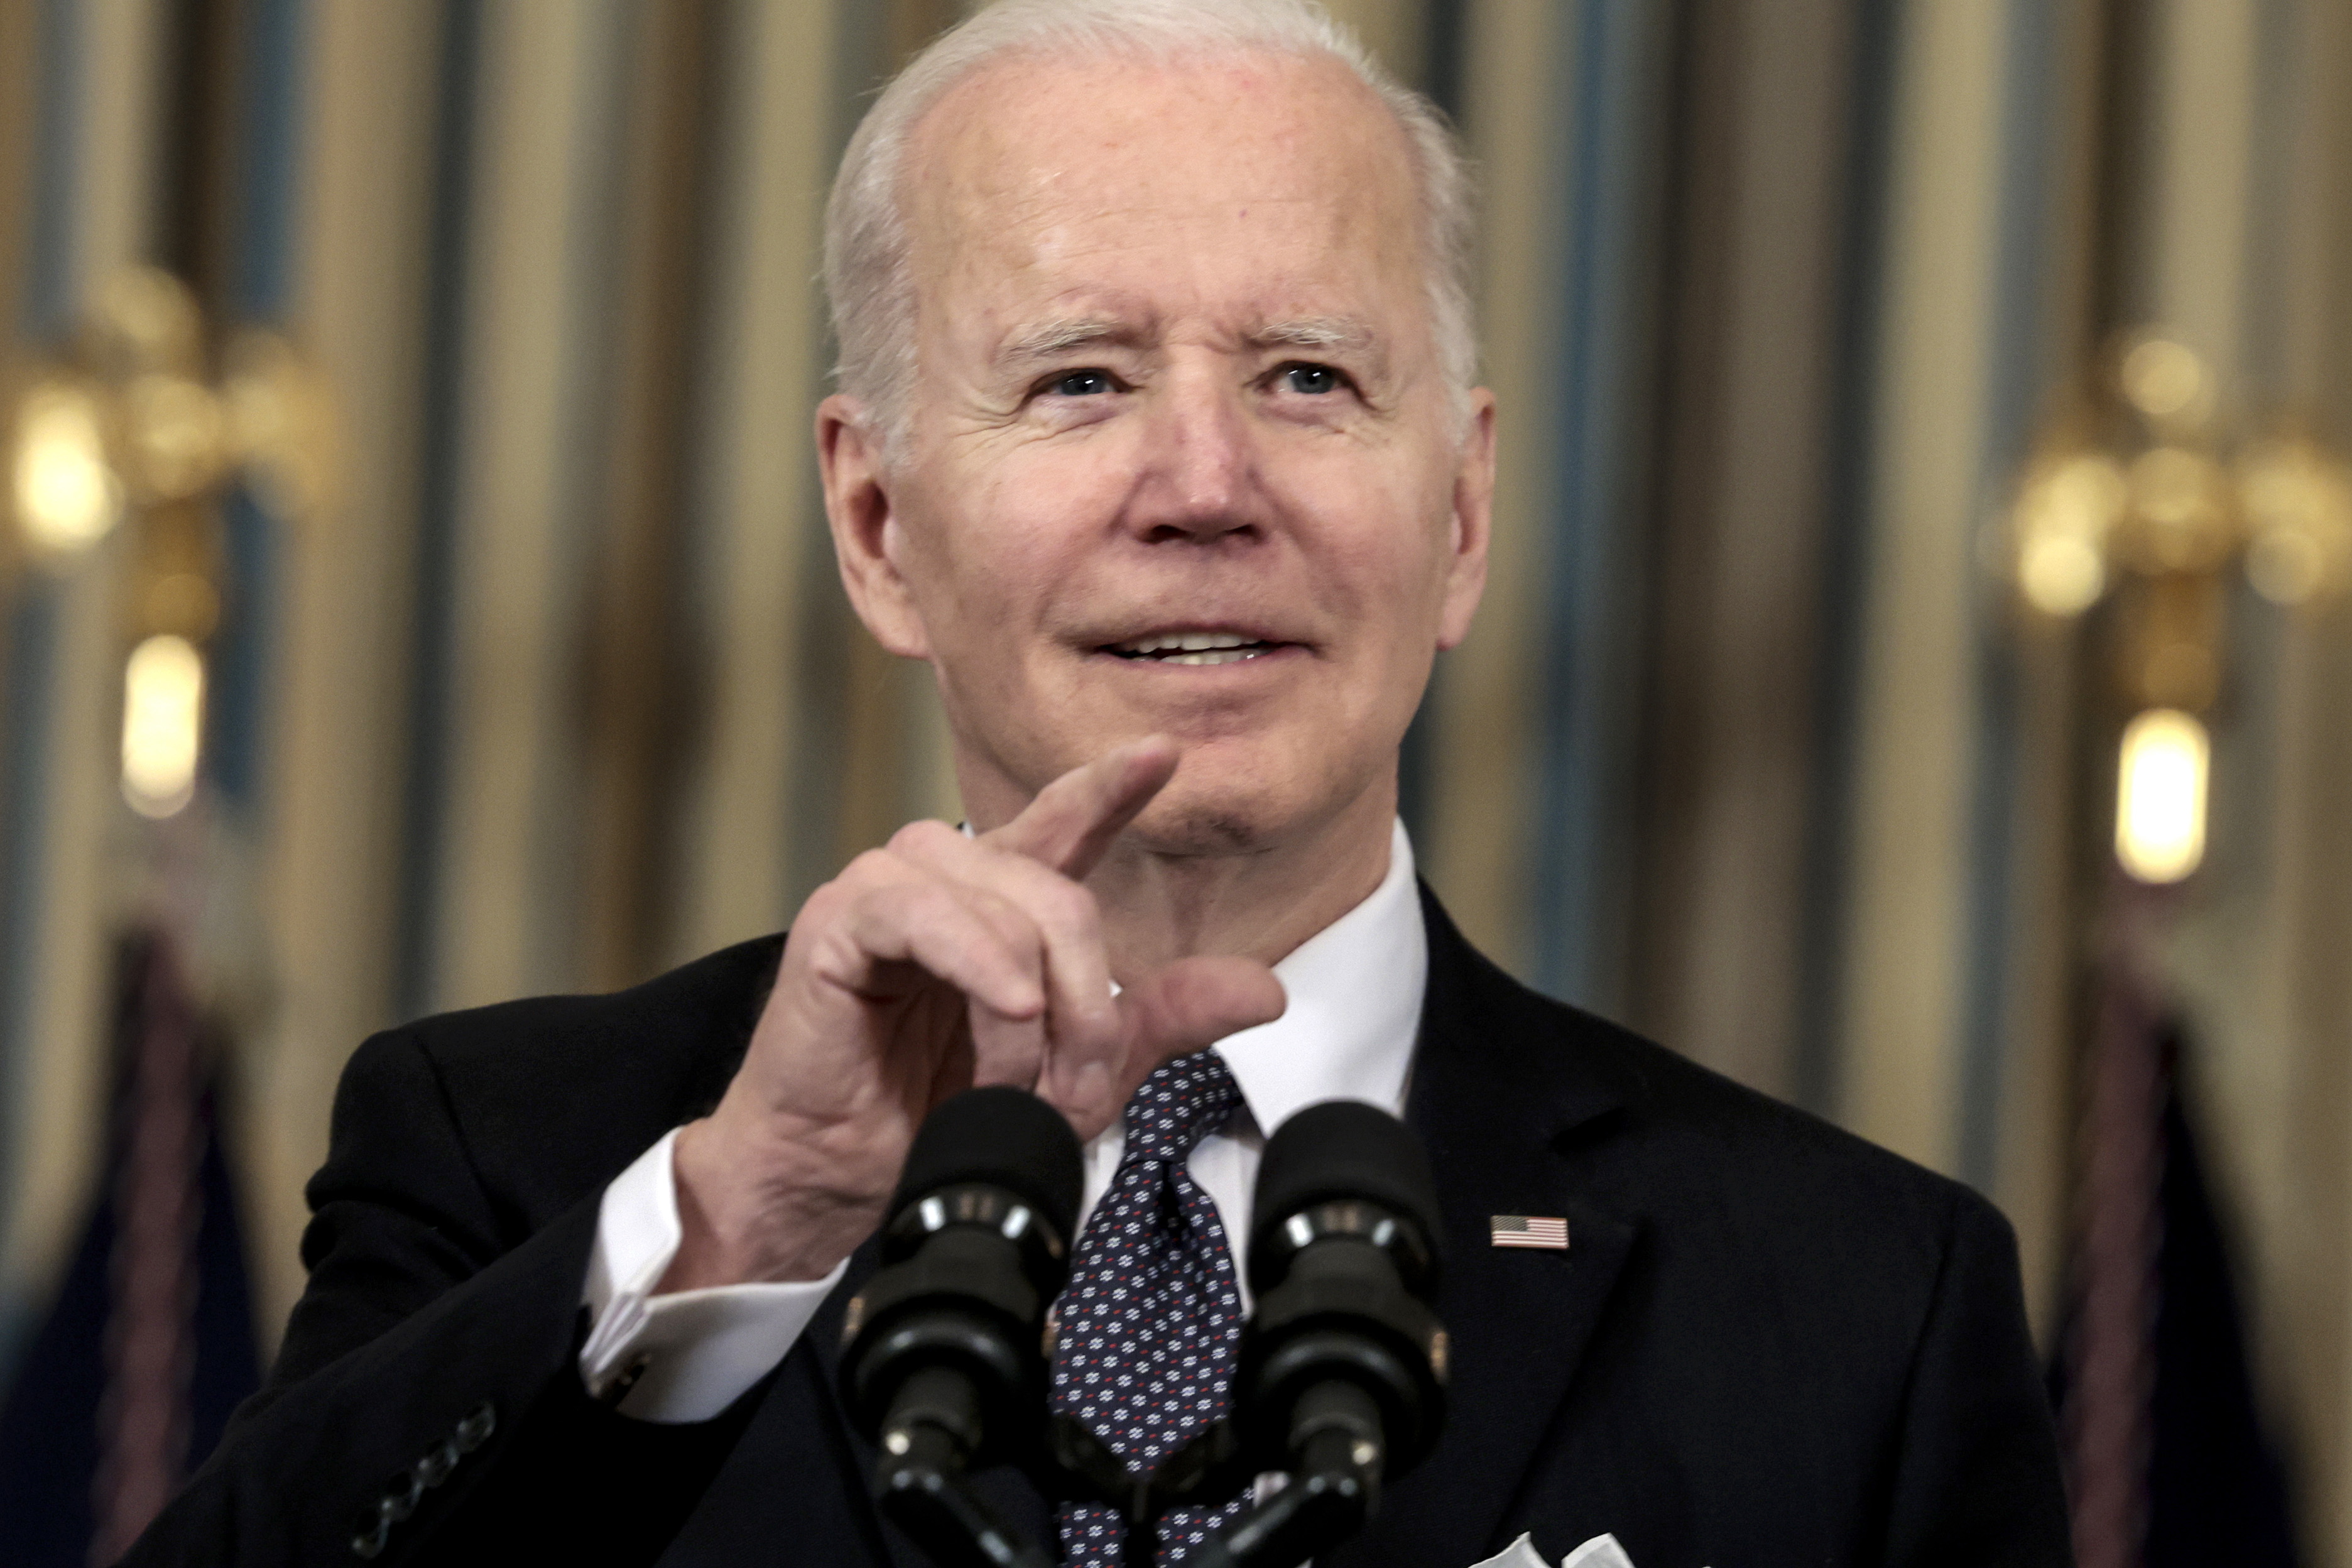 President Joe Biden smiling and pointing from behind a press conference pair of microphones.